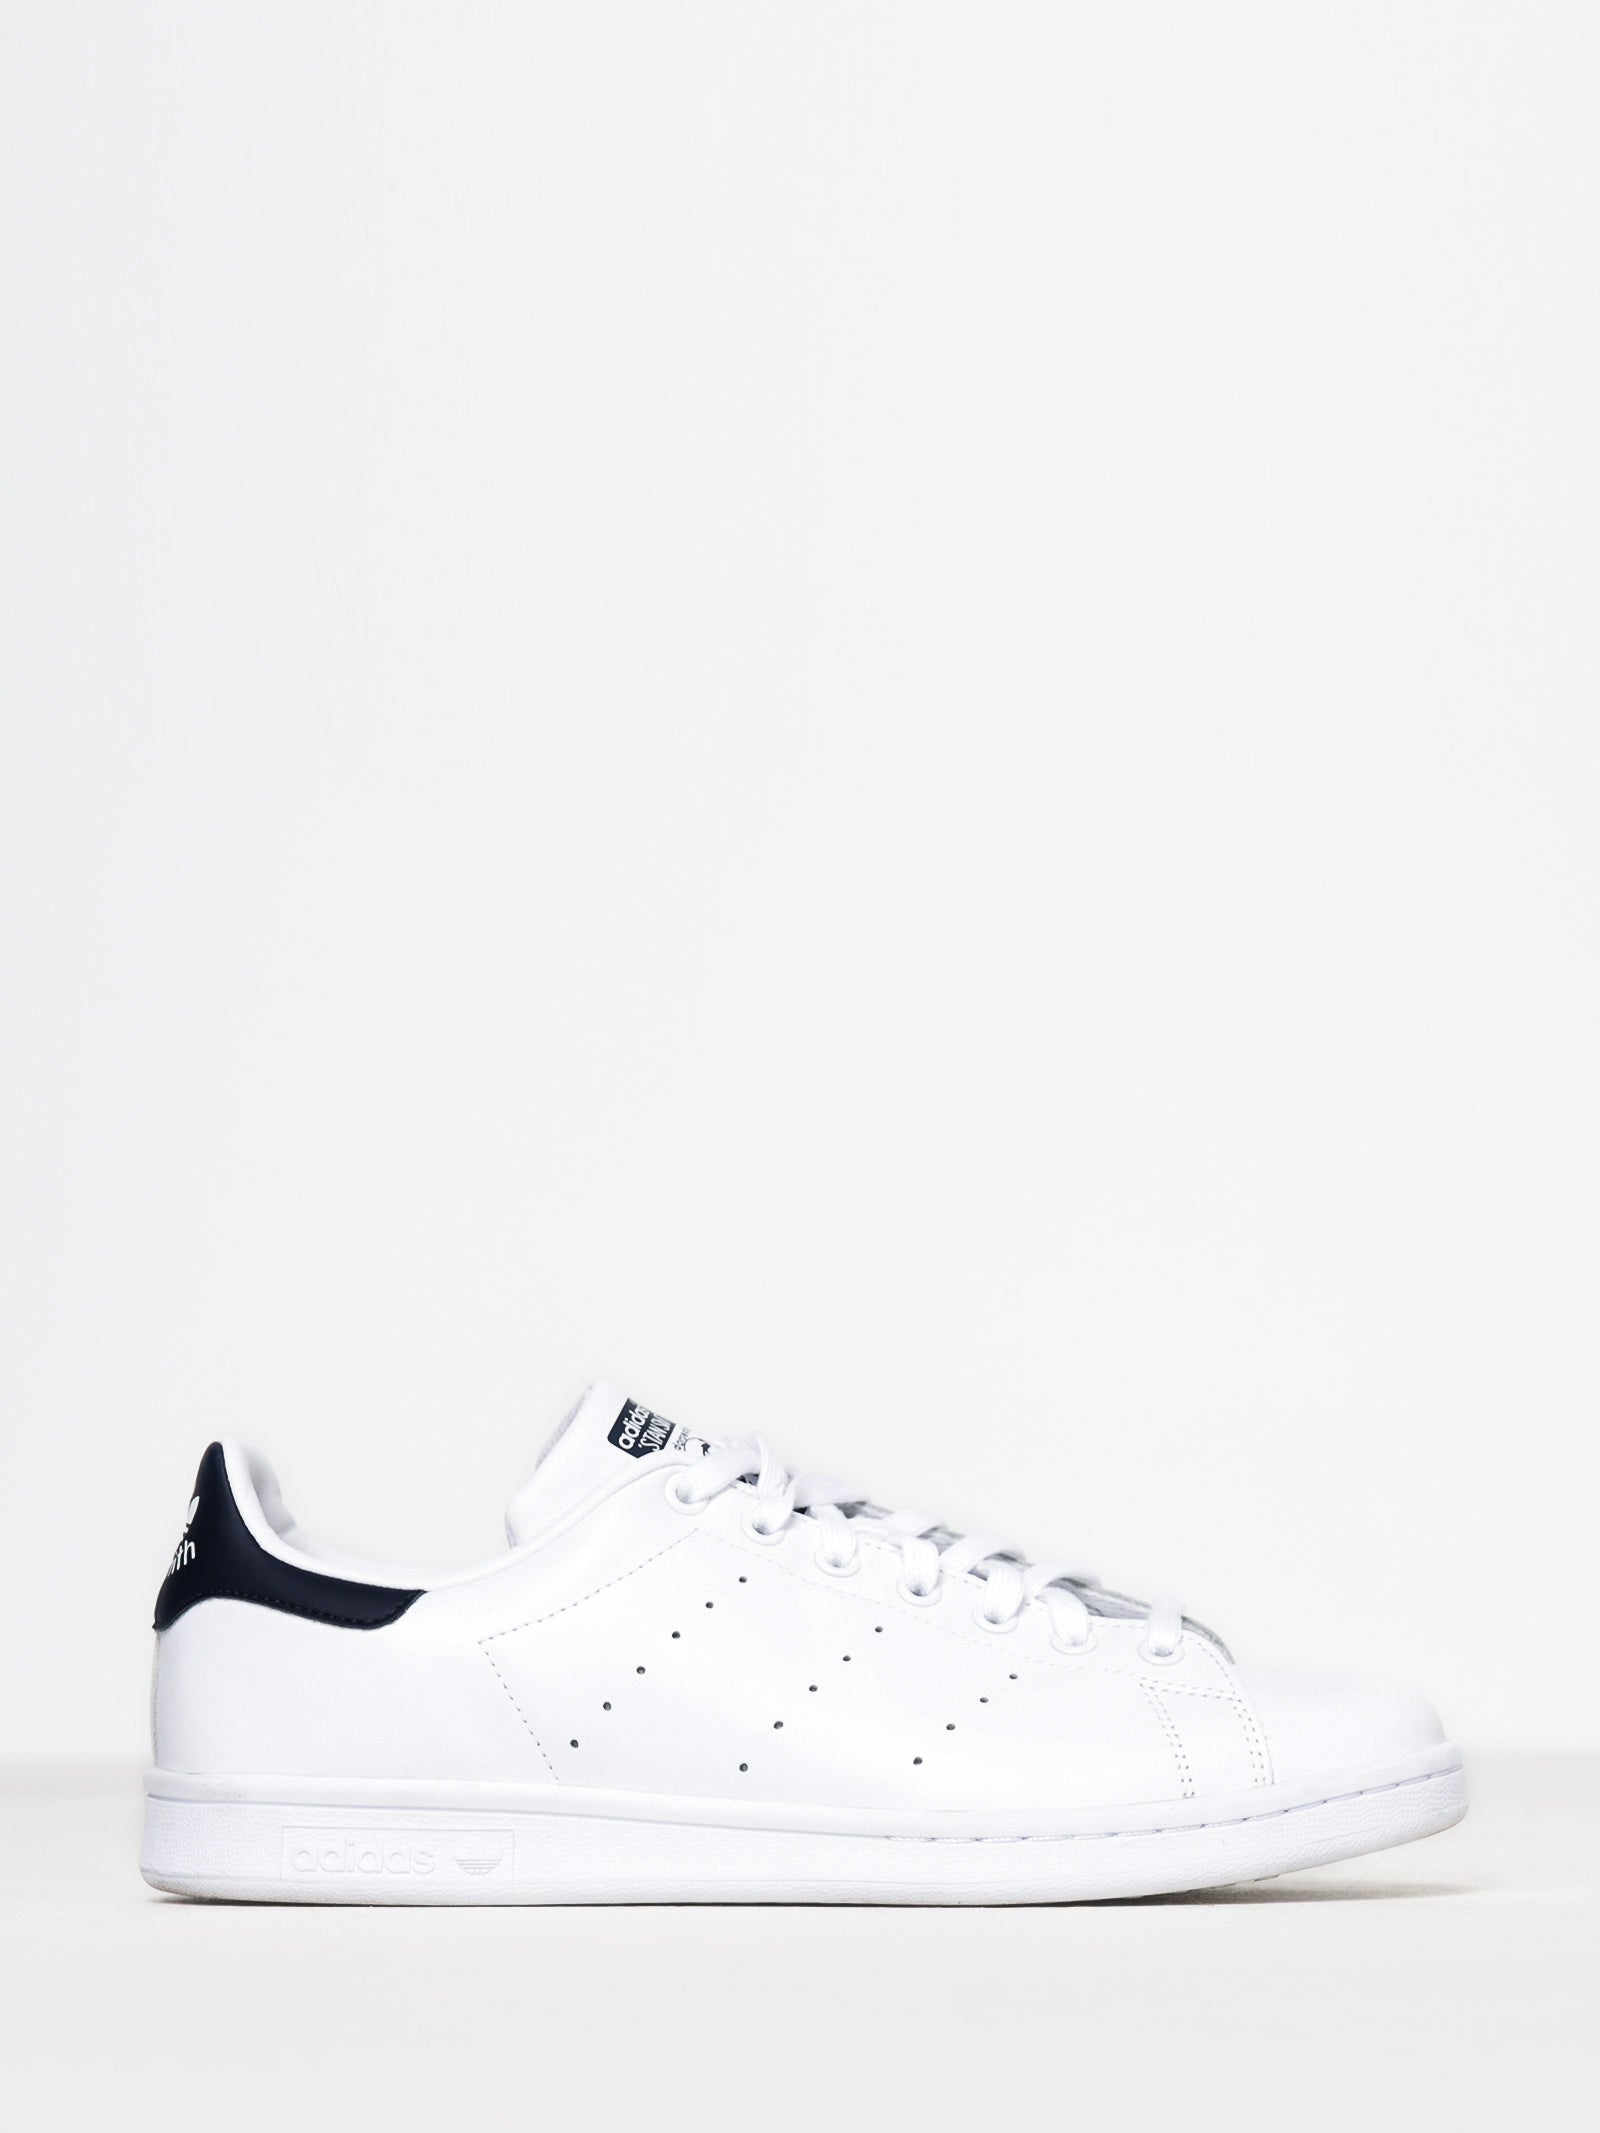 Unisex Stan Smith Sneakers in White & Blue - Glue Store